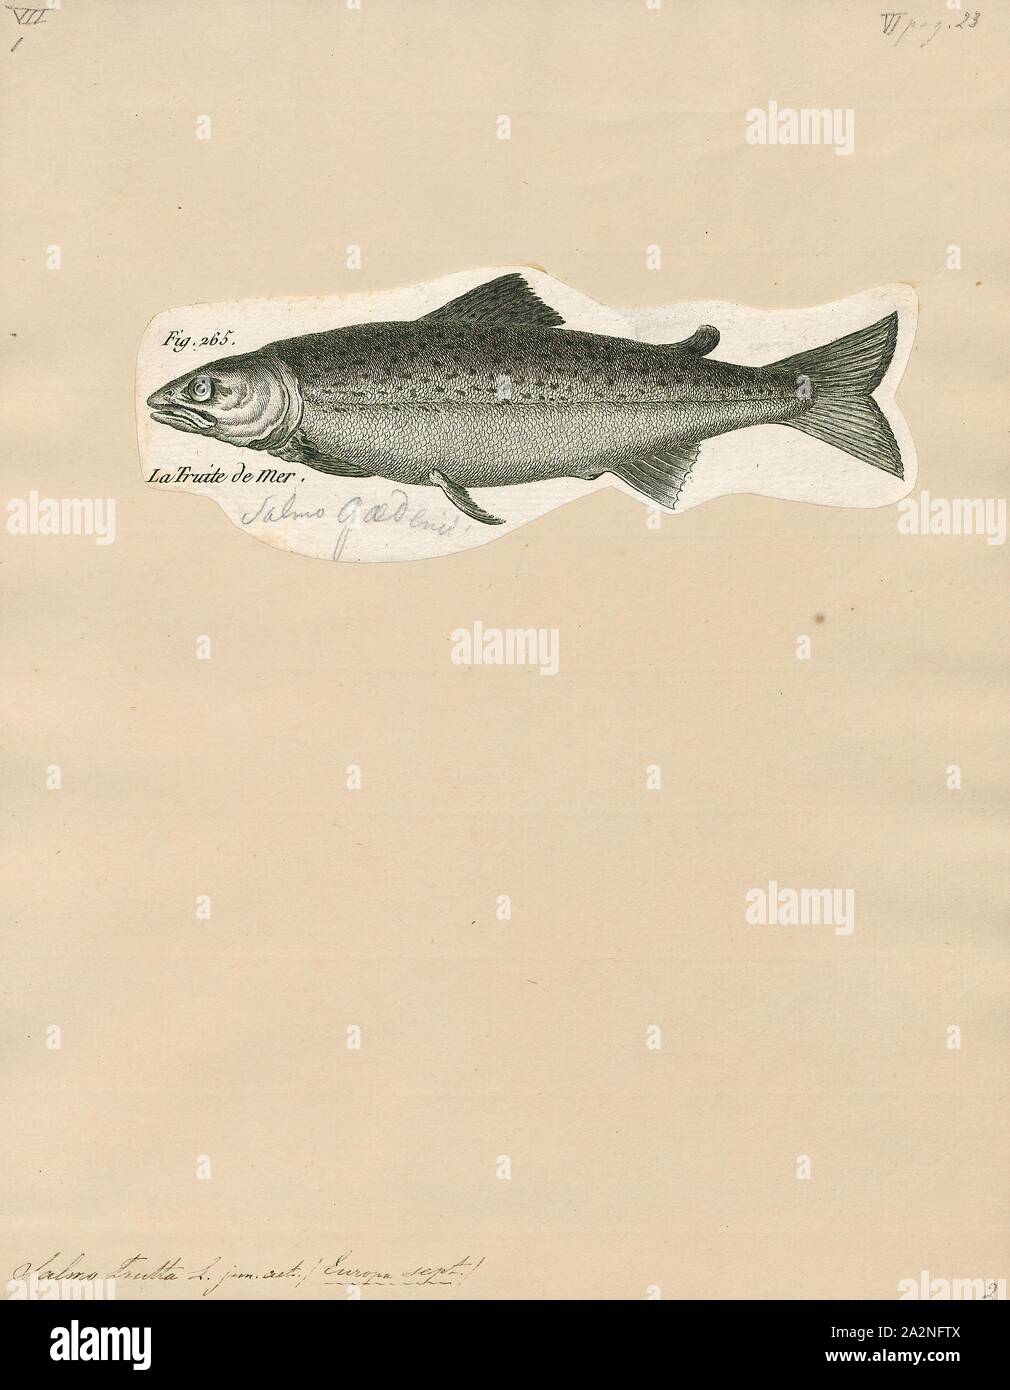 Salmo trutta, Print, The brown trout (Salmo trutta) is a European species of salmonid fish that has been widely introduced into suitable environments globally. It includes both purely freshwater populations, referred to as the riverine ecotype, Salmo trutta morpha fario, and a lacustrine ecotype, S. trutta morpha lacustris, also called the lake trout, as well as anadromous forms known as the sea trout, S. trutta morpha trutta. The latter migrates to the oceans for much of its life and returns to fresh water only to spawn. Sea trout in Ireland and Britain have many regional names: sewin in Stock Photo